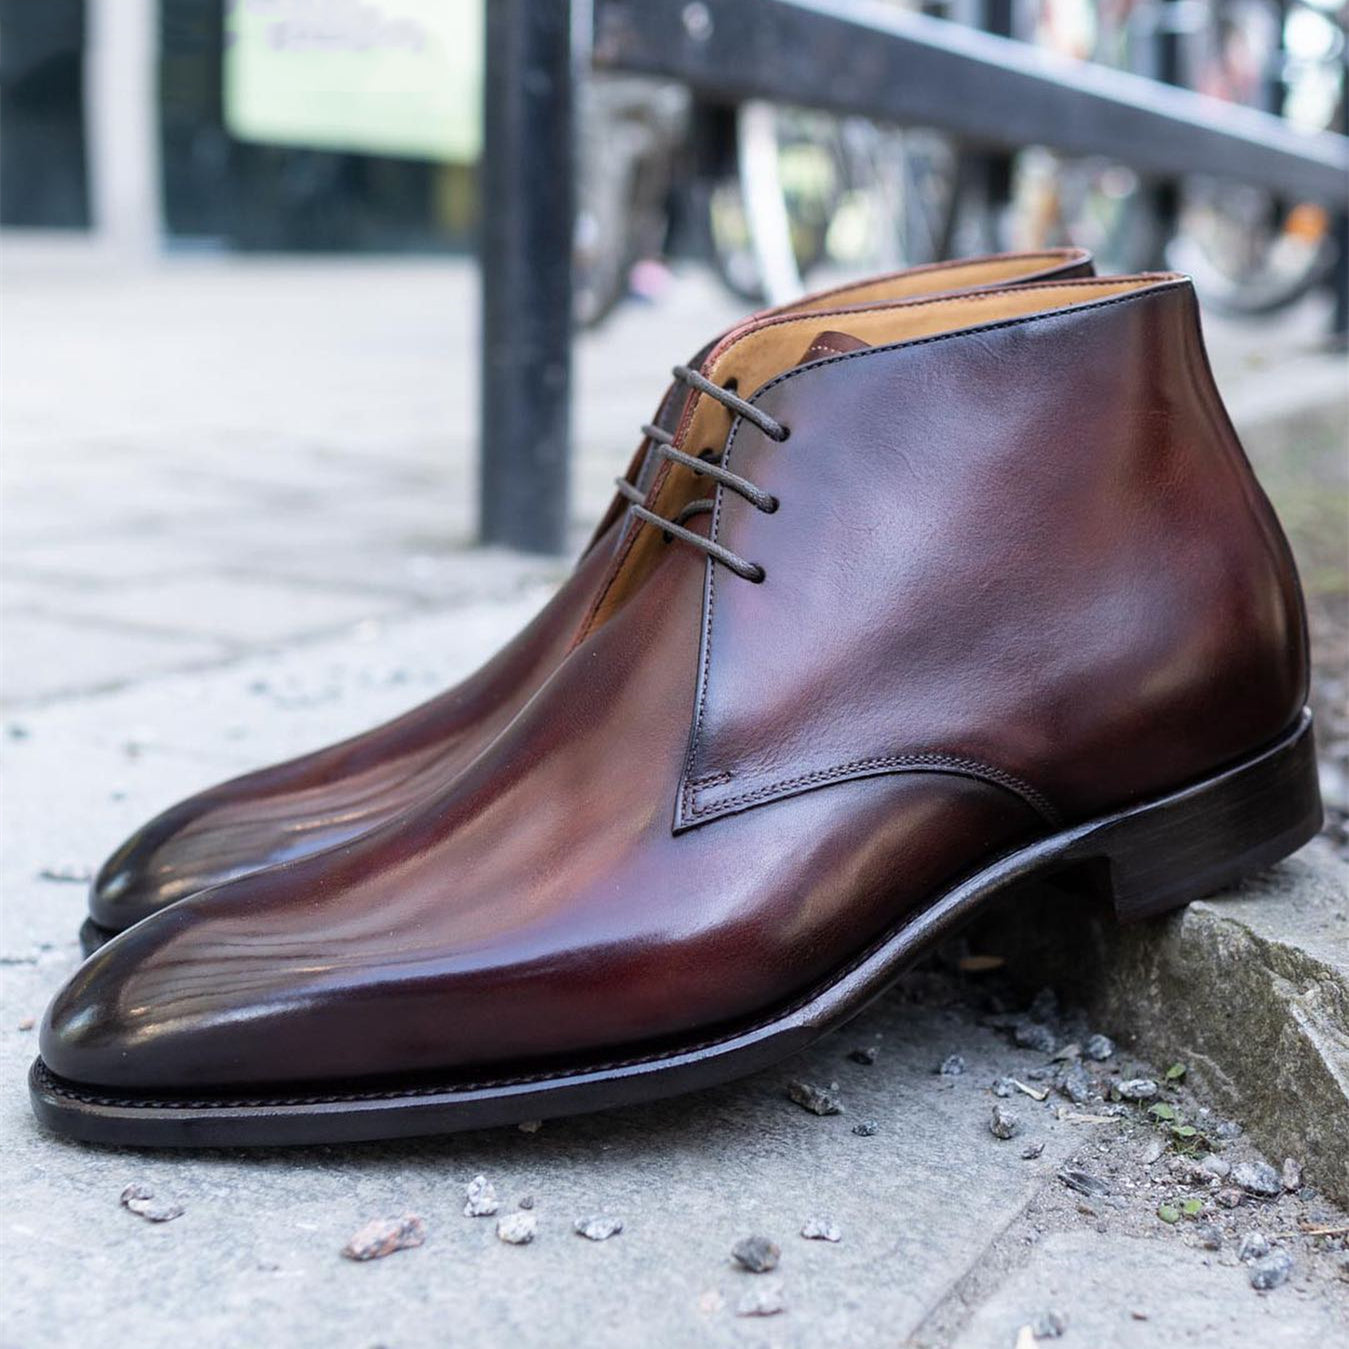 red-brown glossy pointed-toe chukka boots